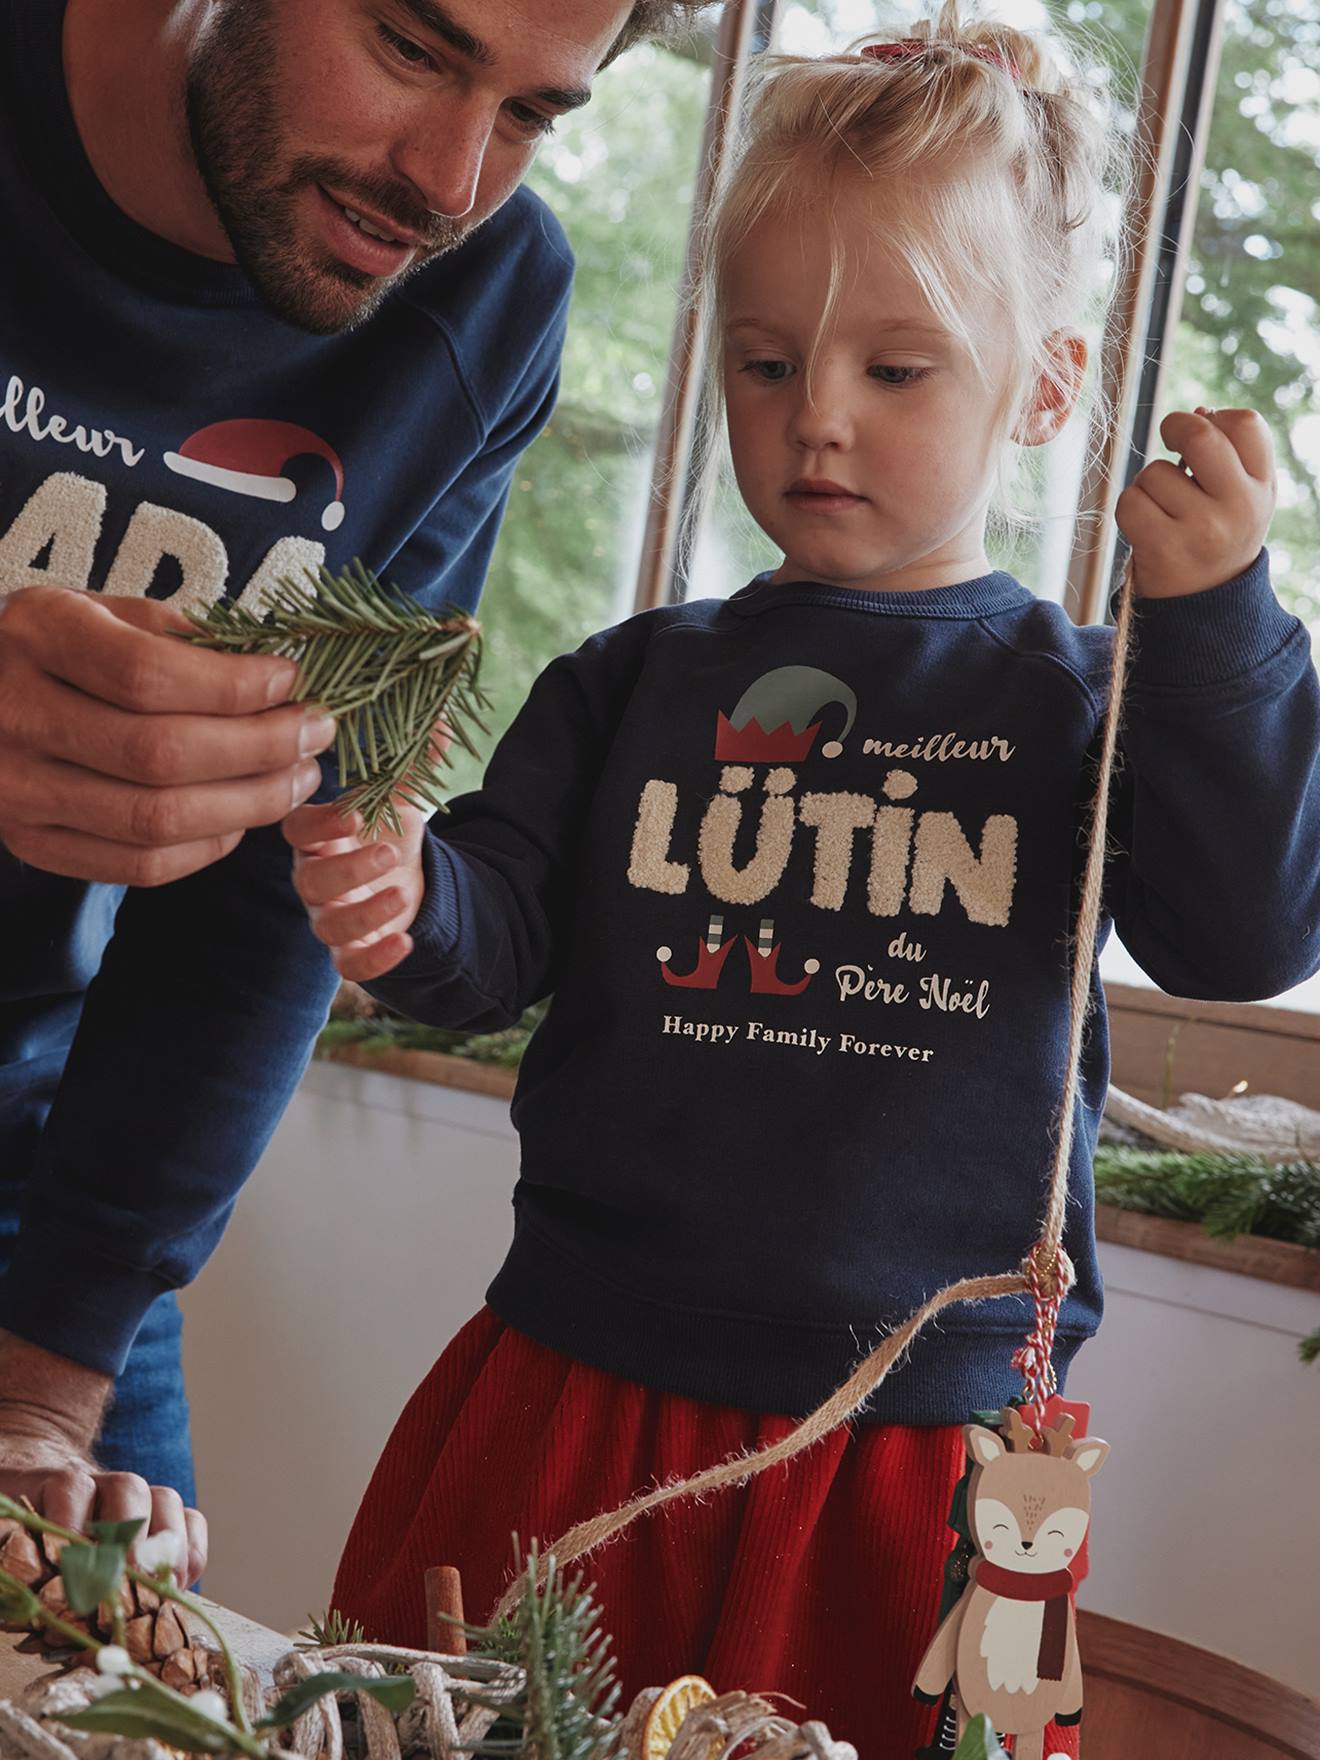 Christmas Special Sweatshirt, "Happy Family Forever" Capsule Collection, for Children navy blue